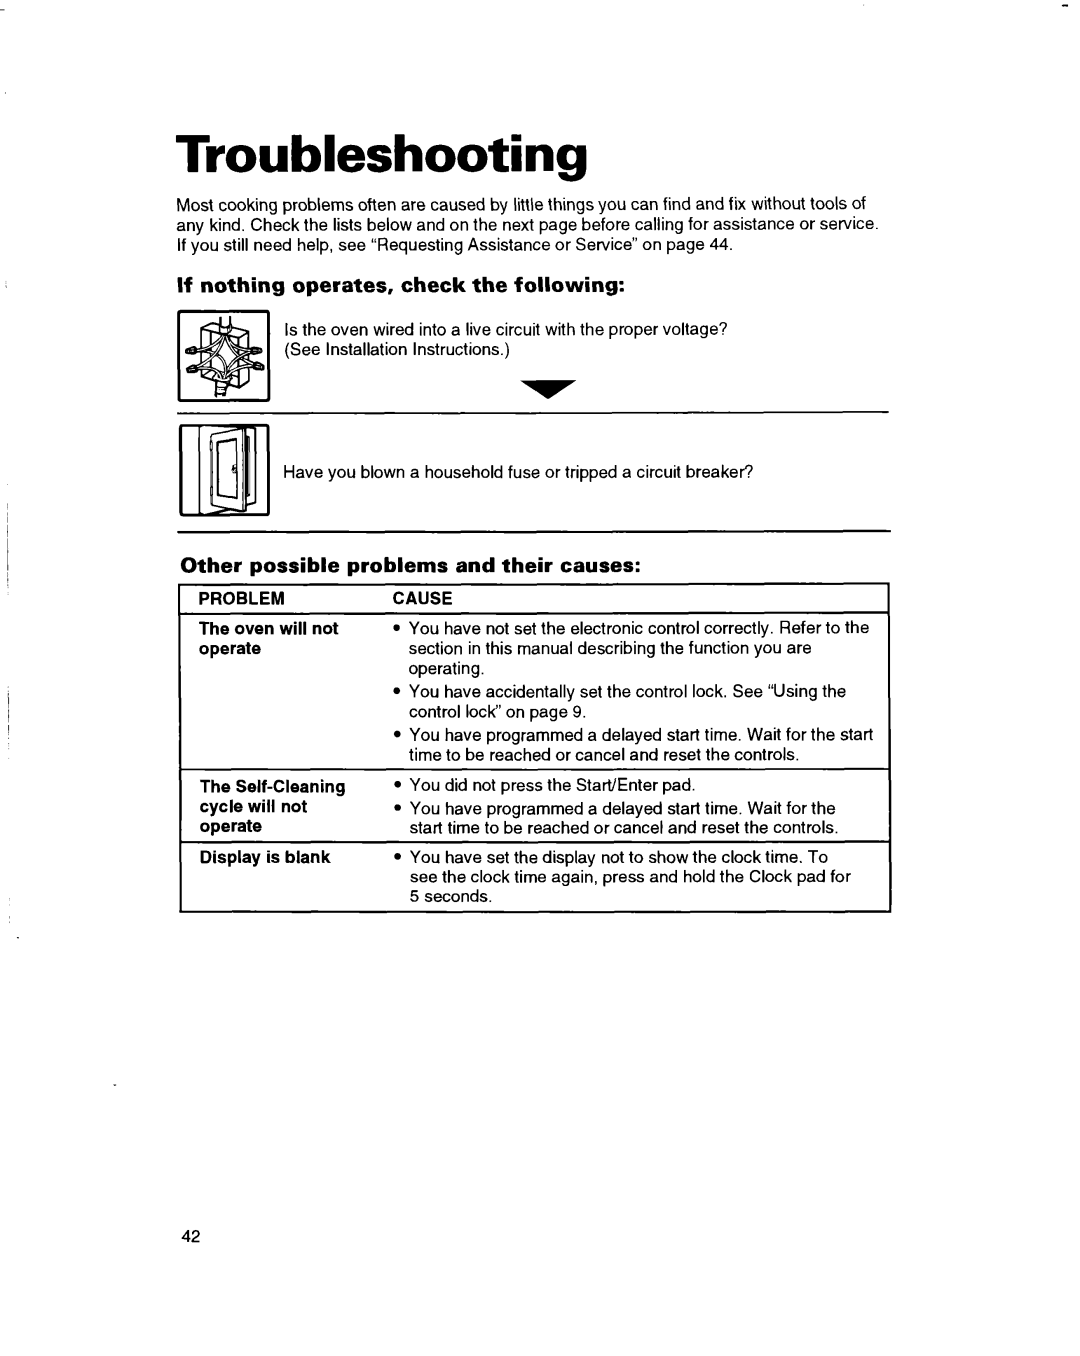 Whirlpool RBS270PD Troubleshooting, If nothing operates, check the following, Other possible problems and their causes 